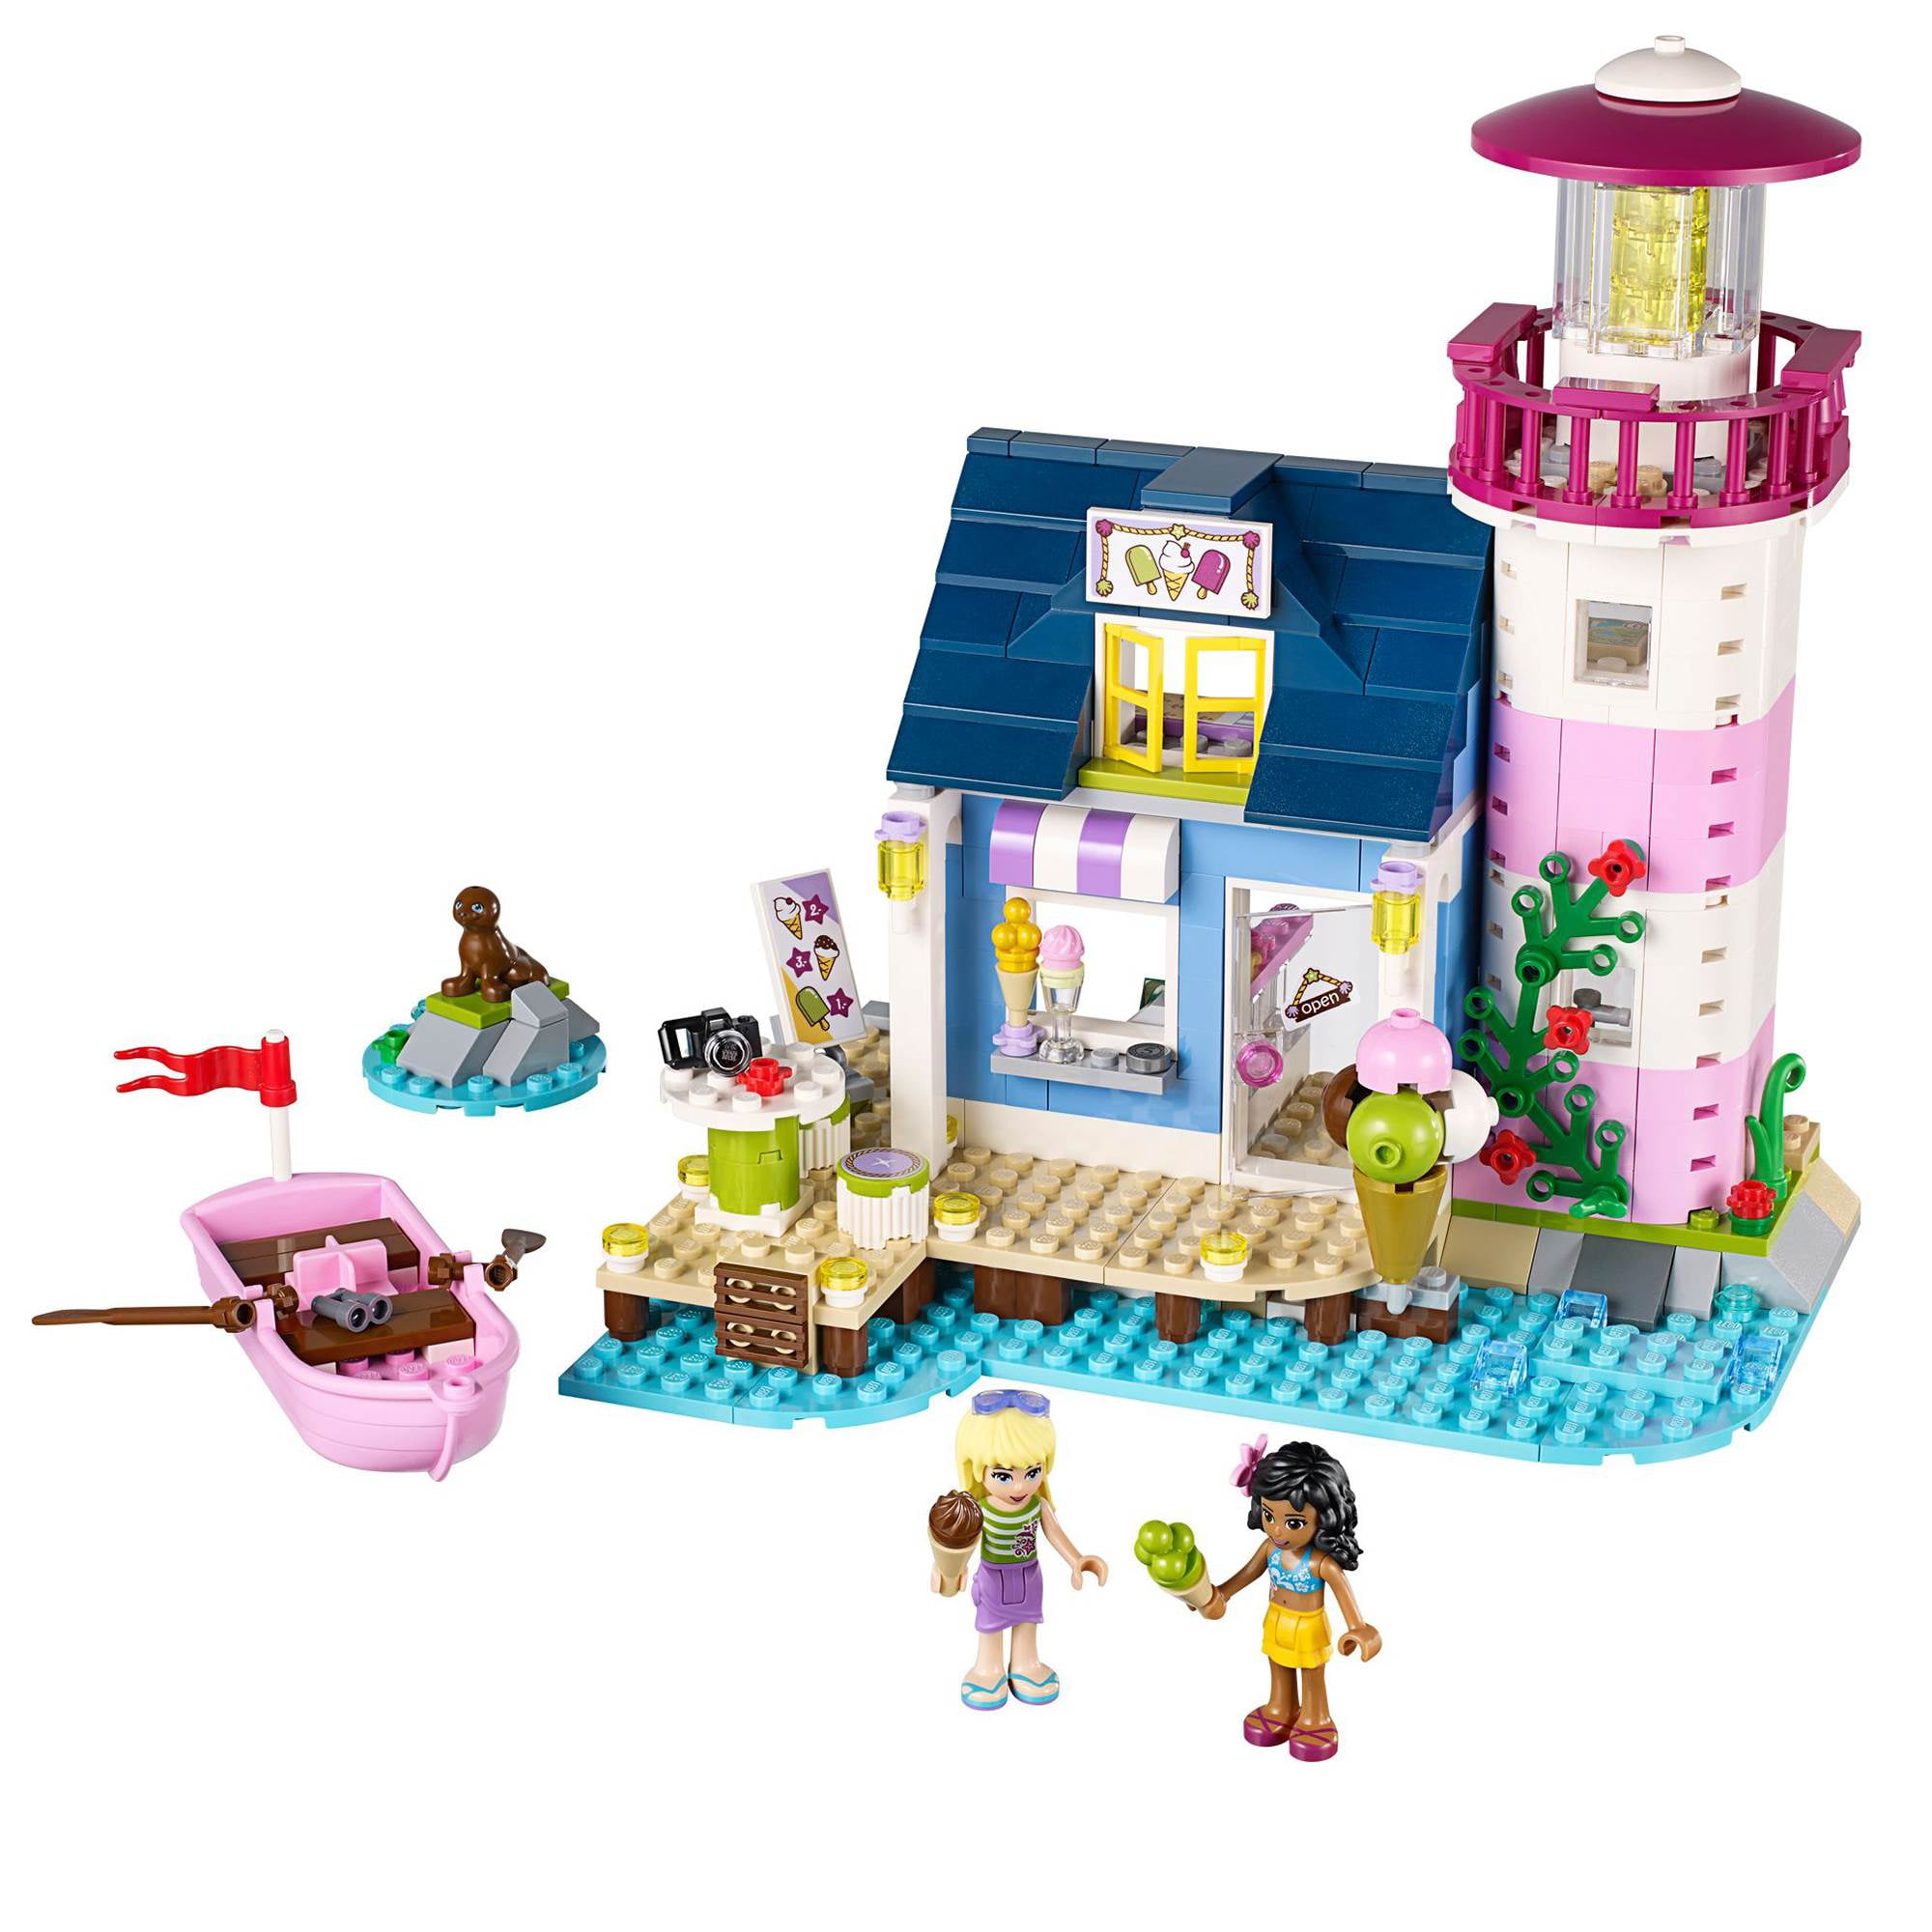 Lego Friends Girls Will Love - Toy Time Treasures